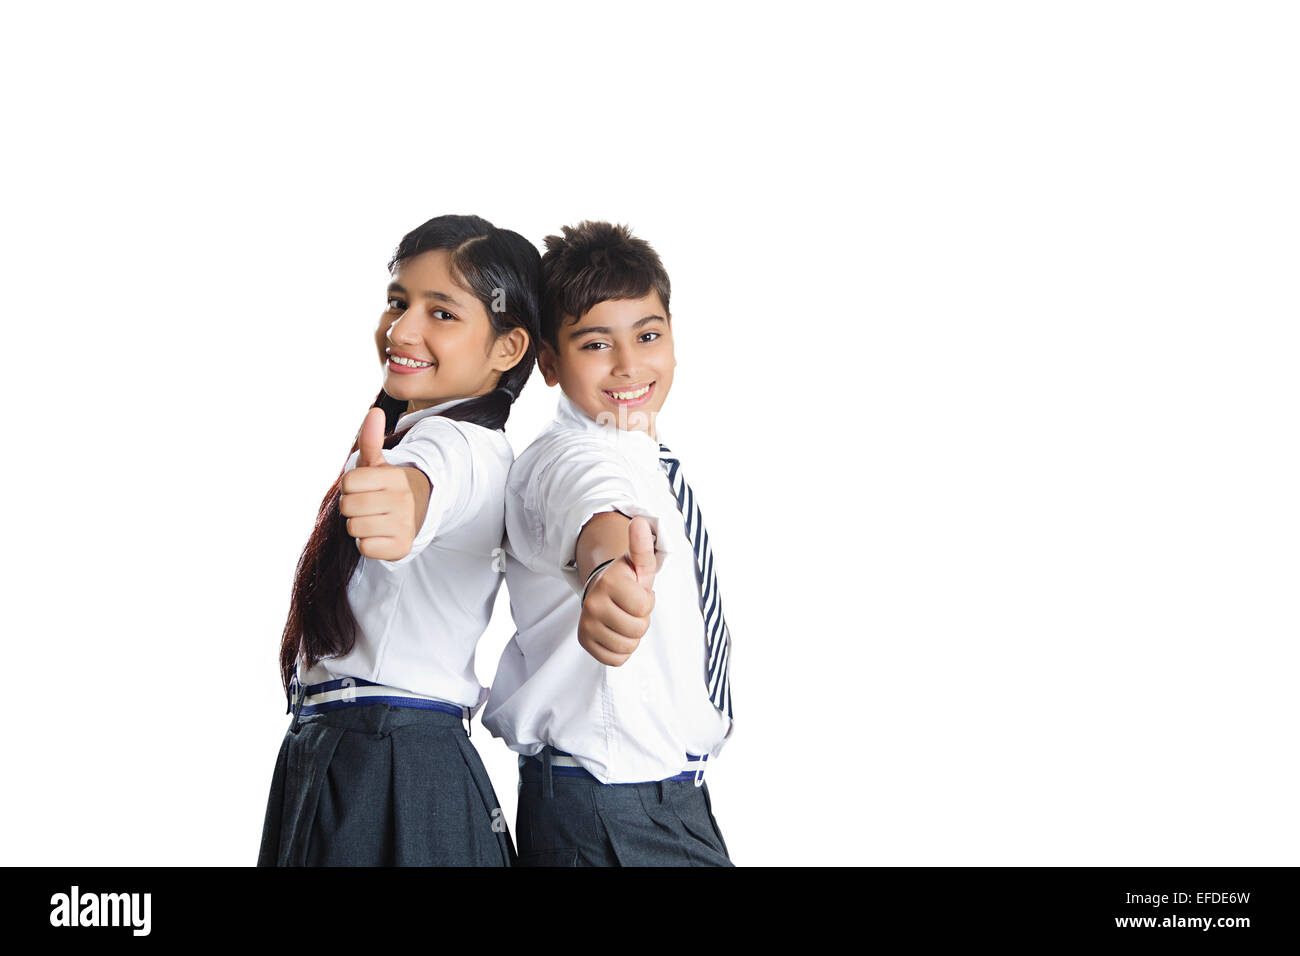 2 indian school friends students standing pose Stock Photo